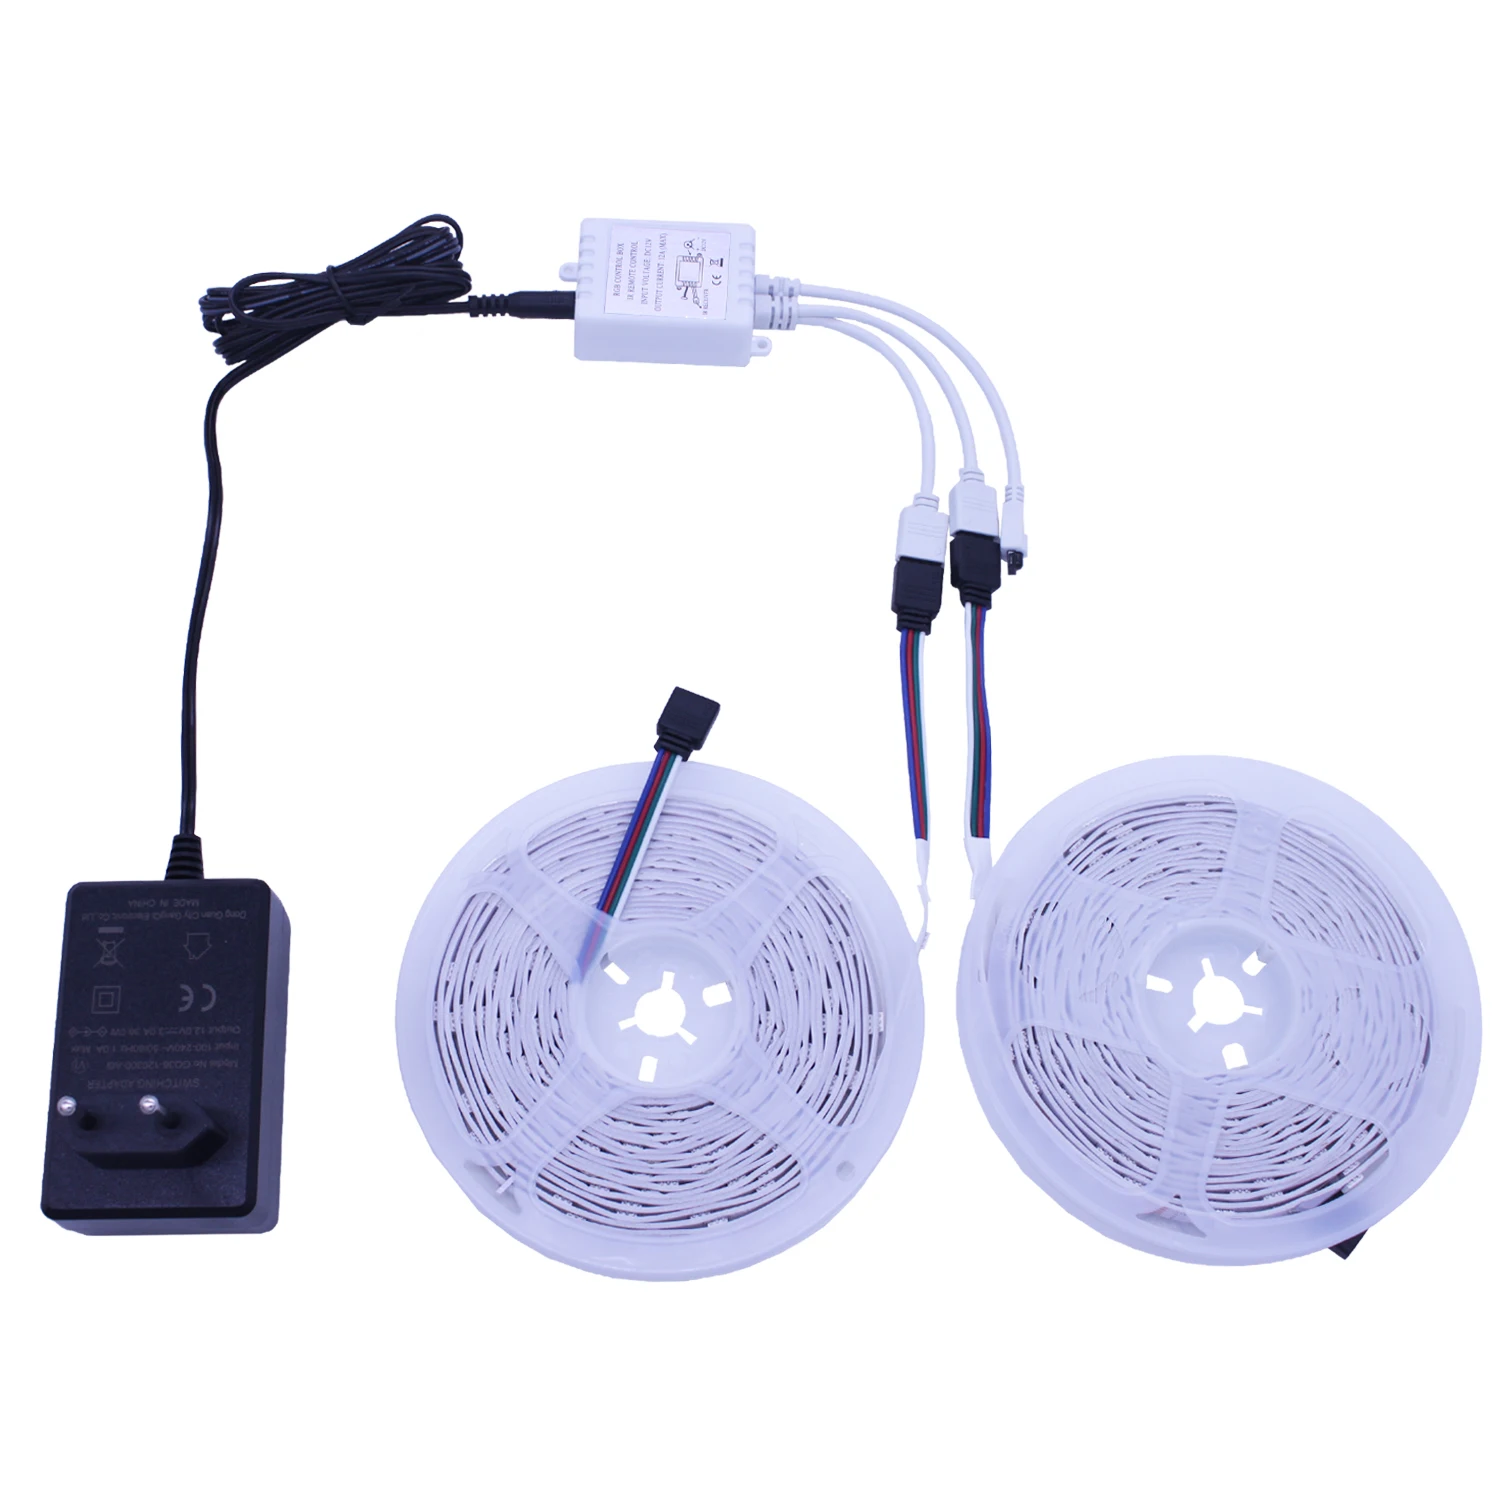 

10M LED Strip Lights IP65 Waterproof 32.8 FT Color Changing with 44 Keys IR Remote Control 300 LEDs 5050 RGB (2 X 5m)